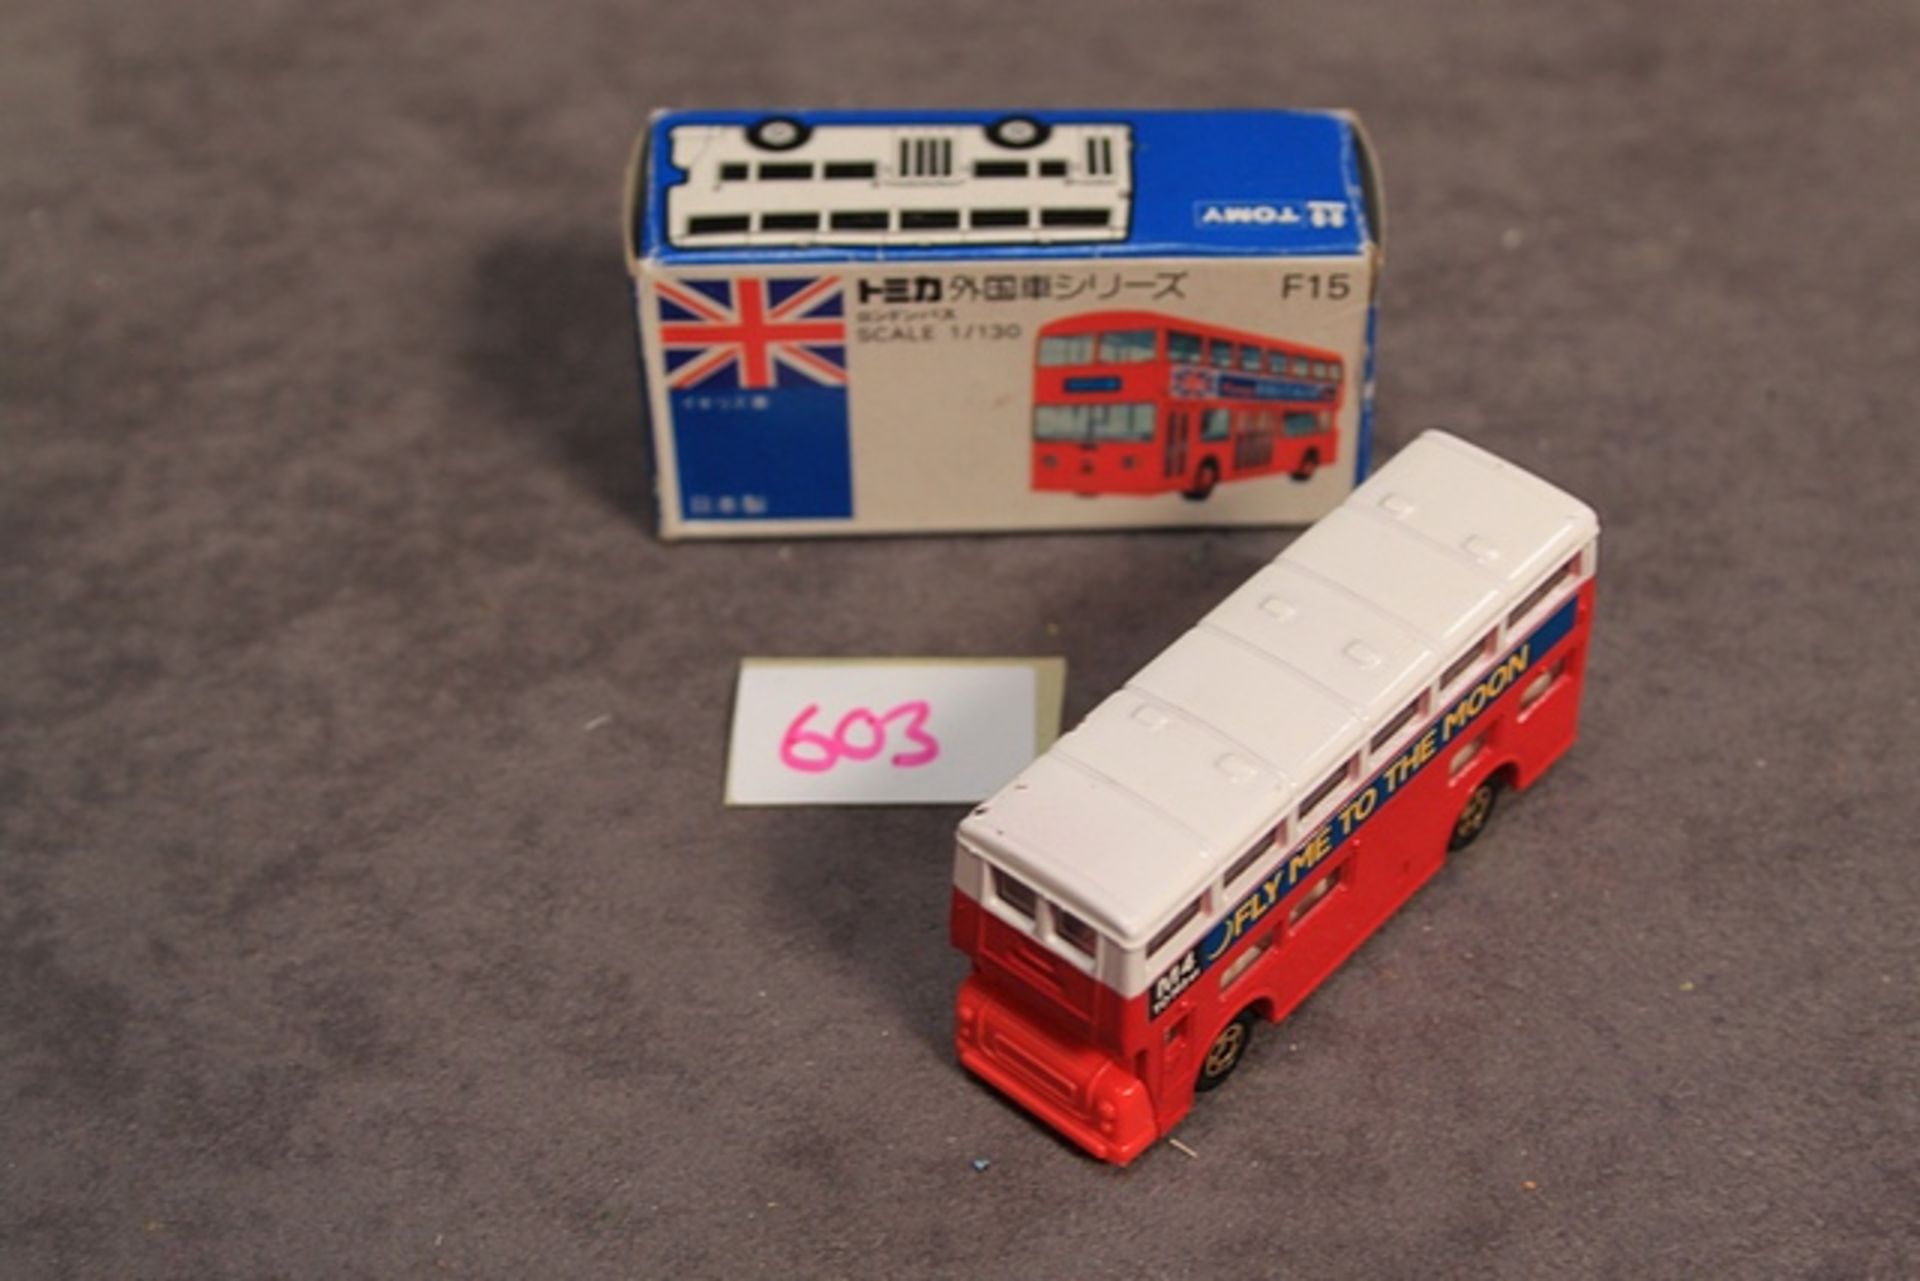 Mint Tomica diecast #F15 London Bus in Red & White with gold wheels (Fly me to the moon)with box - Image 2 of 3